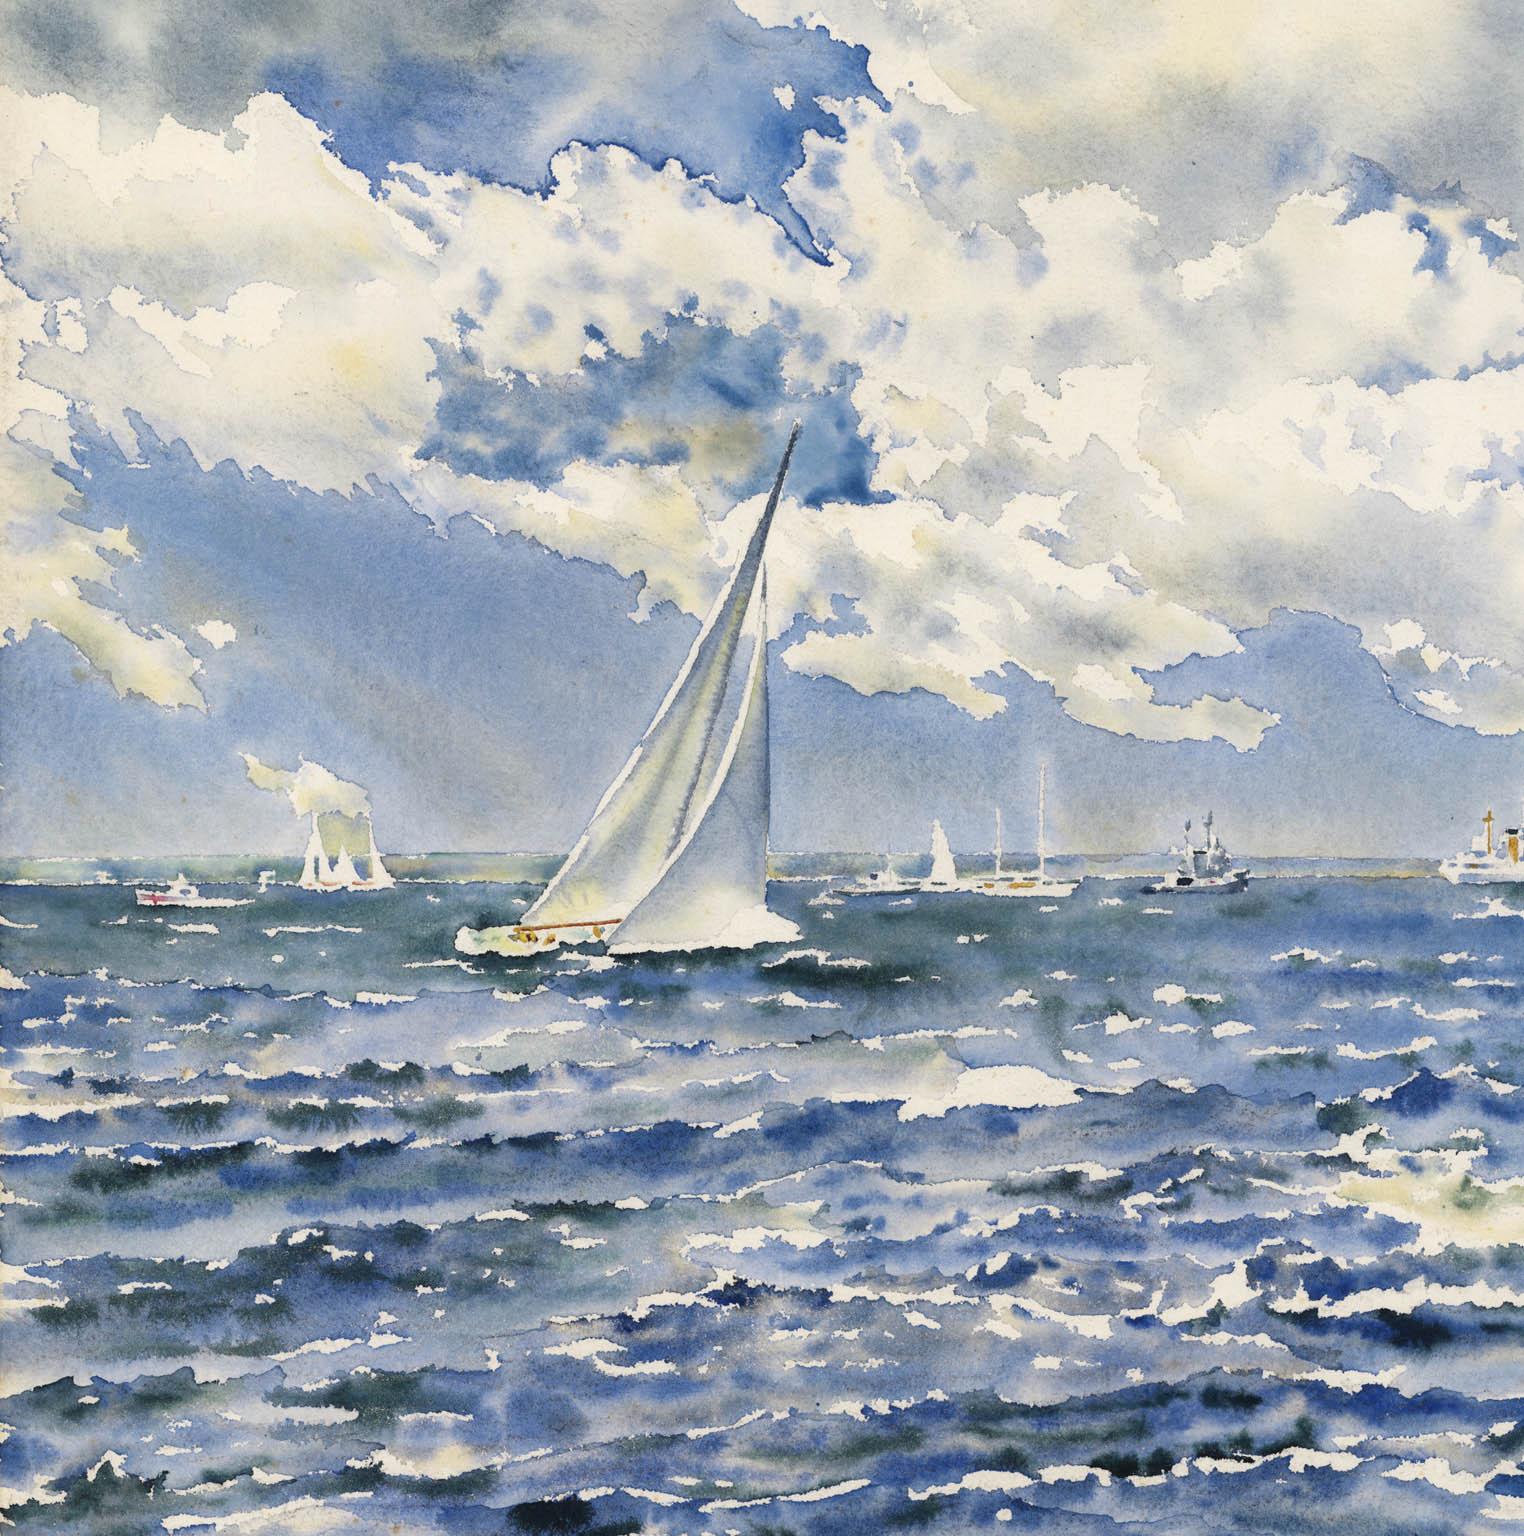 AMERICA'S CUP - 1967.  BEAT TO THE FINISH - INTREPID (USA) VS. DAME PATTIE (AUS) - Naturalistic Art by Joseph Webster Golinkin